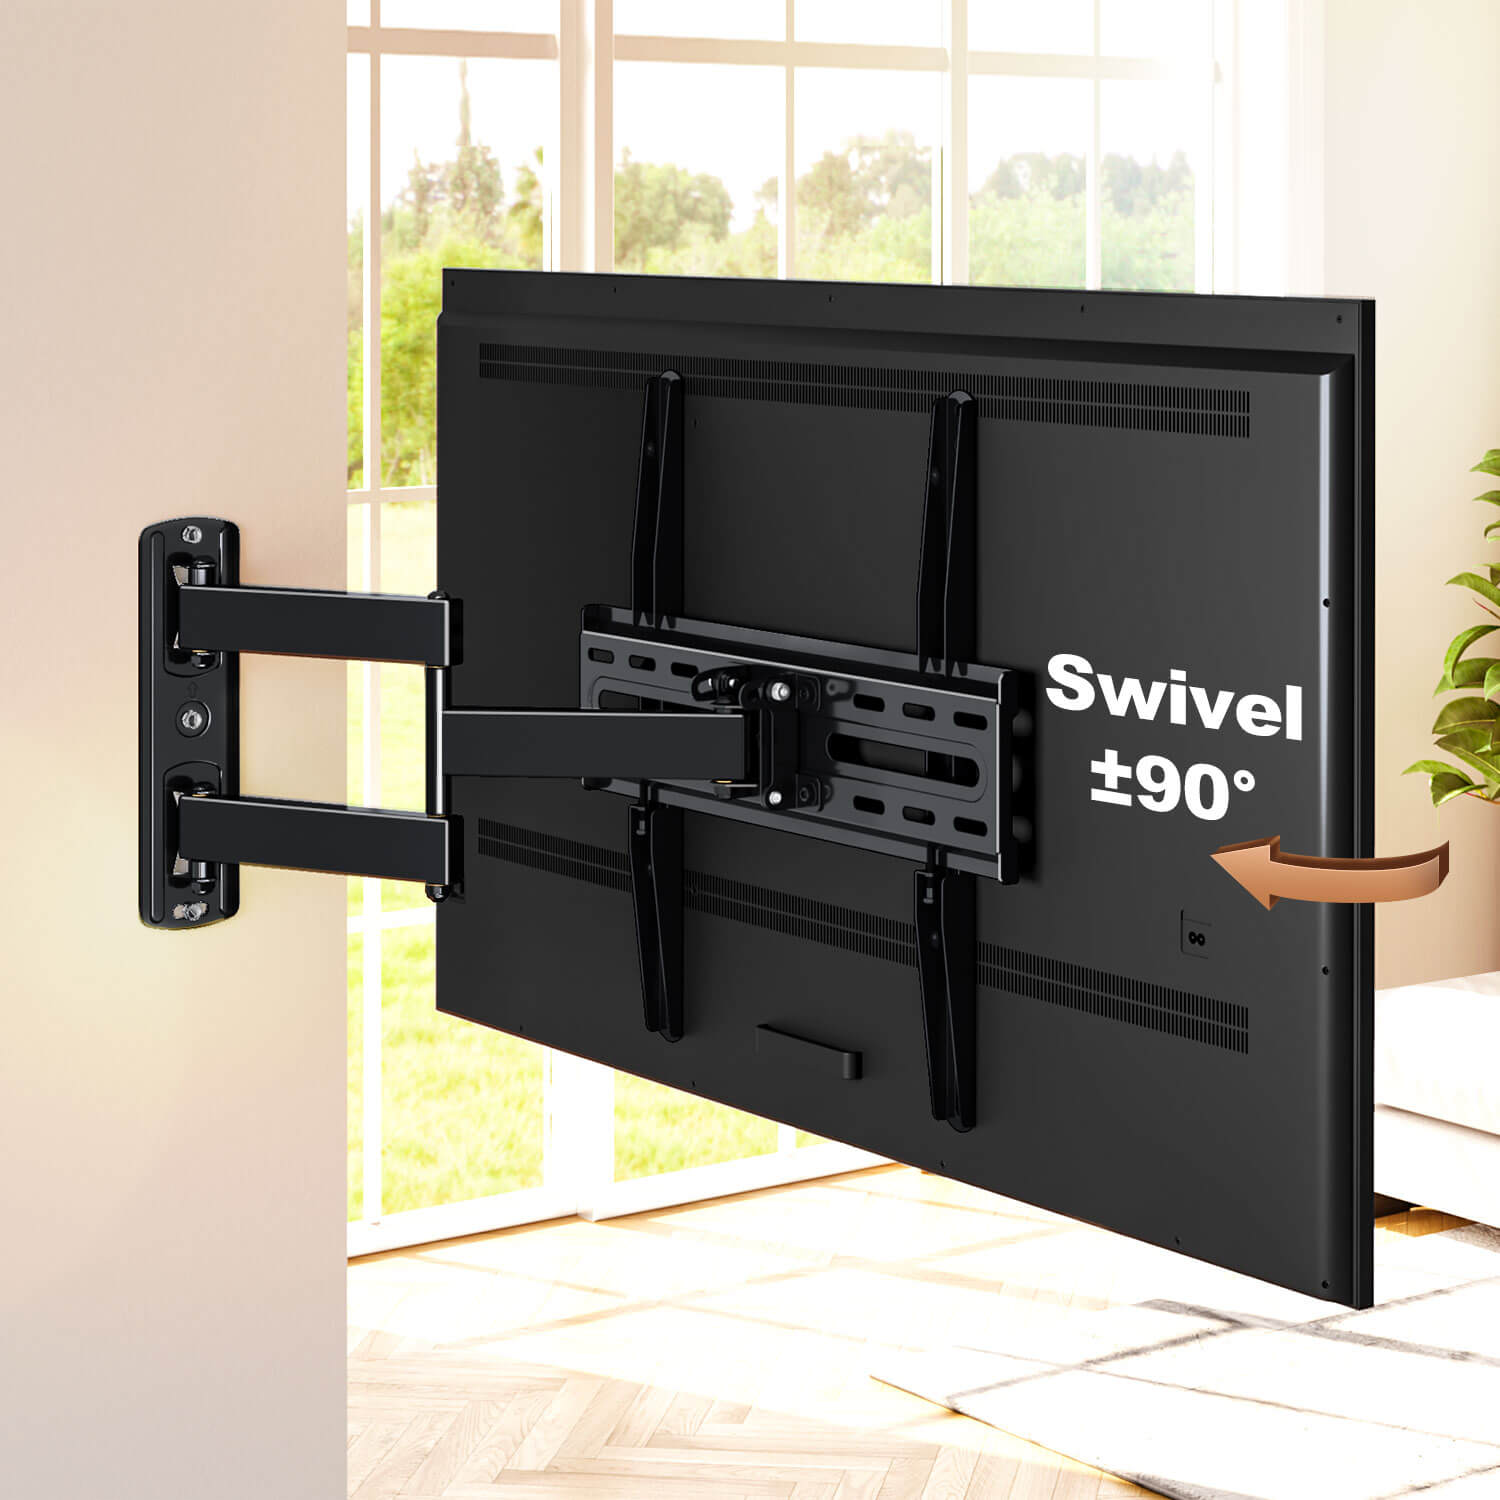 swivel TV mount adjusts the TV 90° left or right for flexible viewing